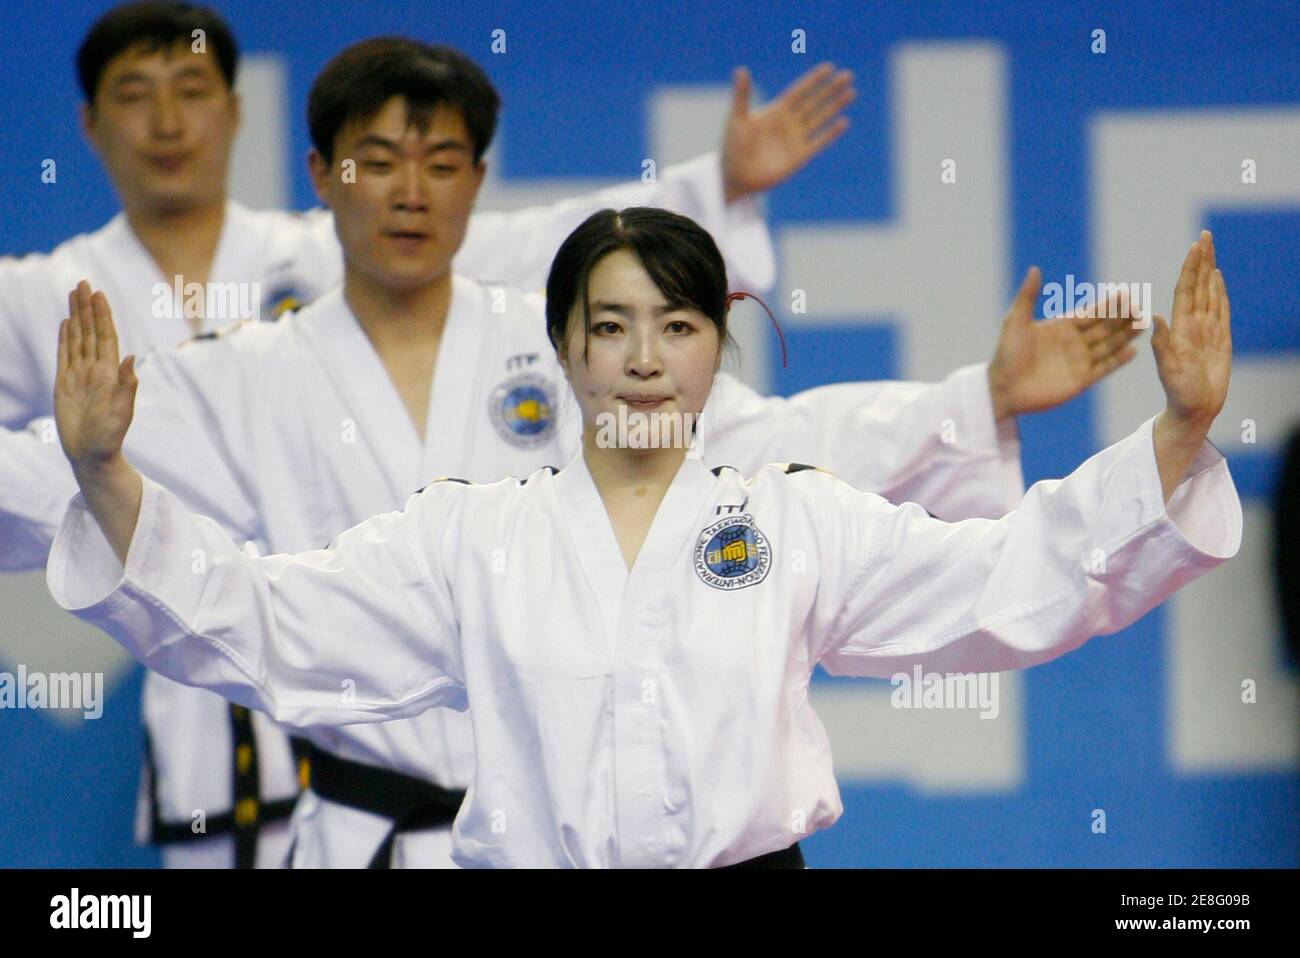 Members from a North Korean Taekwondo demonstration team perform on the stage in Chunchon, about 90 km (55 miles) northeast of Seoul, April 7, 2007. REUTERS/Jo Yong-Hak (SOUTH KOREA) Stock Photo